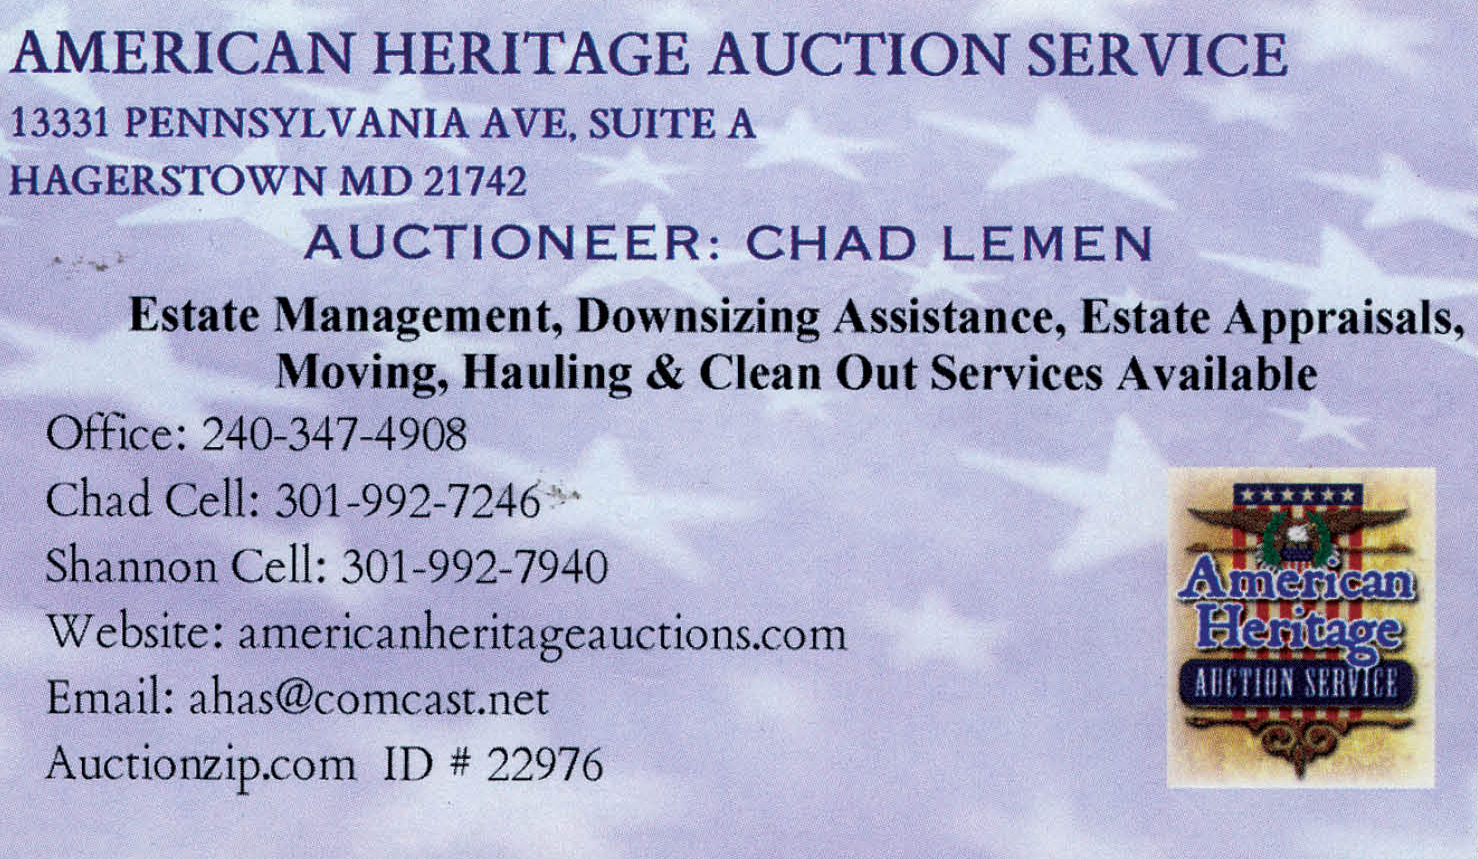 American Heritage Auction Service